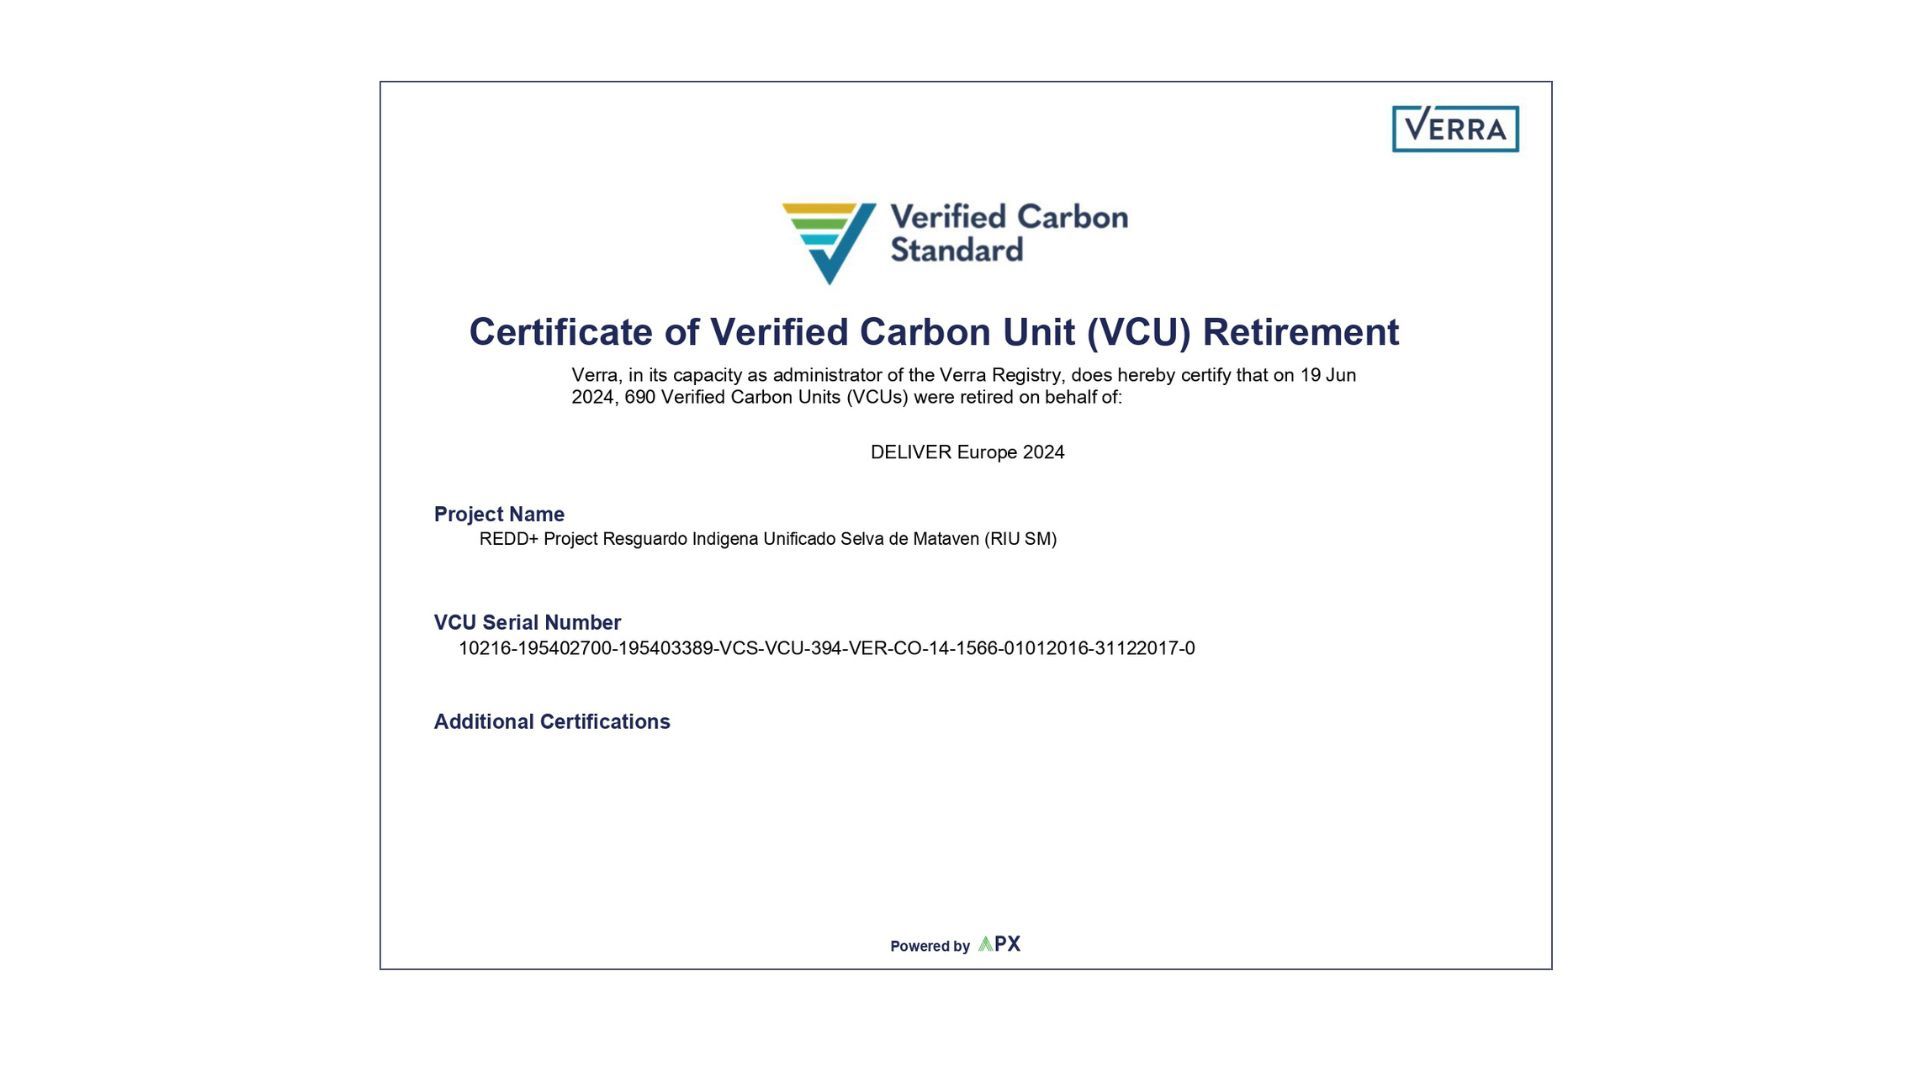 DELIVER EUROPE 2024 VERFIED CARBON UNIT CERTIFICATIONS